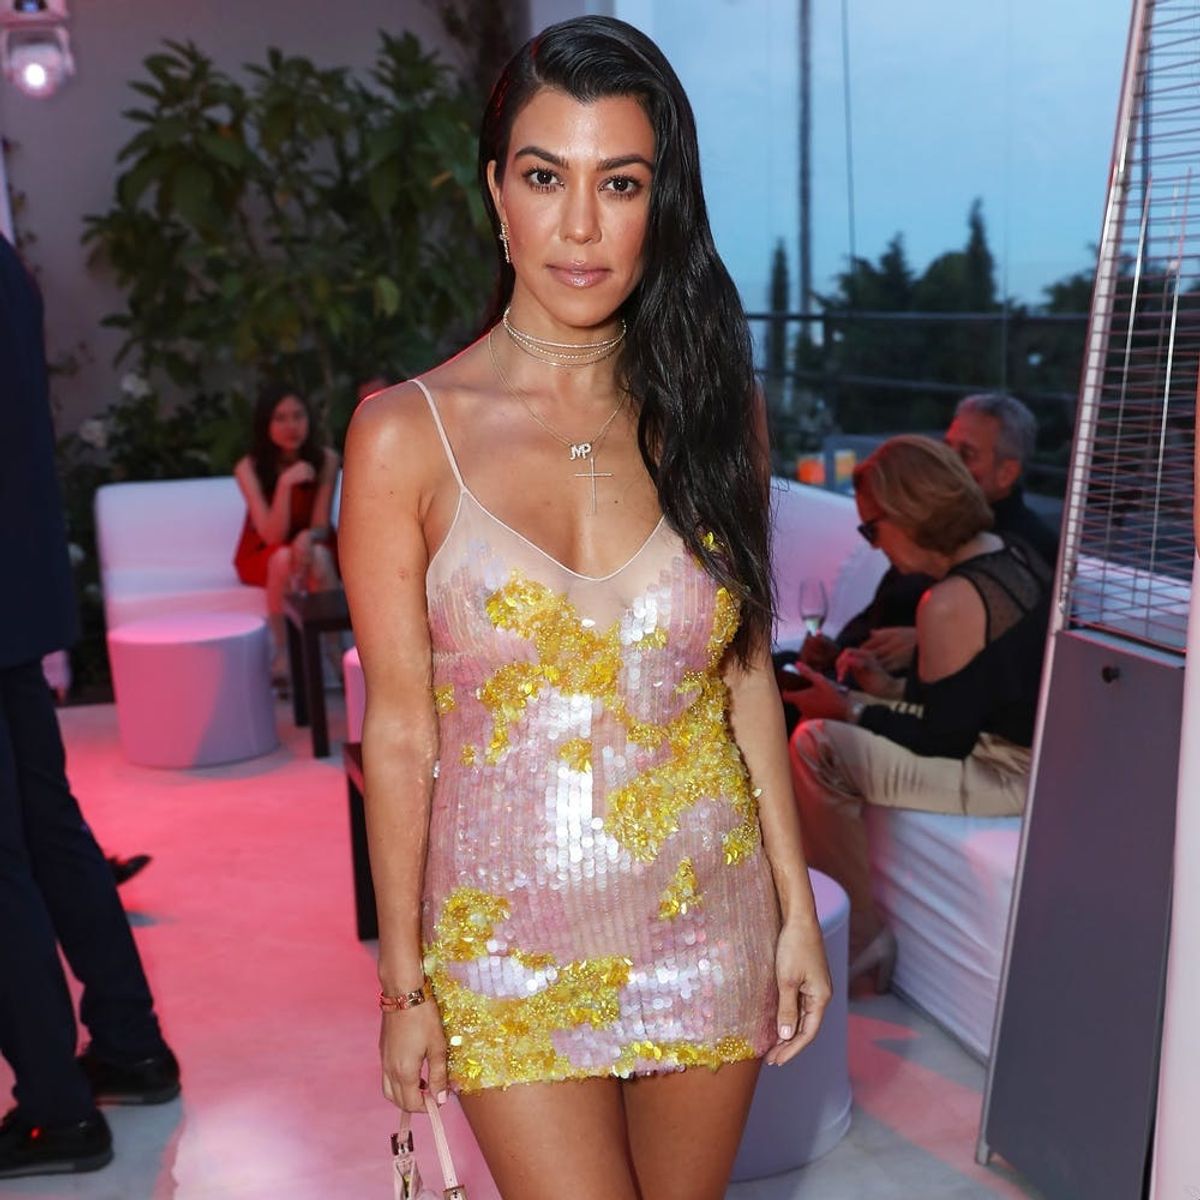 This Is Why Kourtney Kardashian Made the Switch to Natural Deodorant